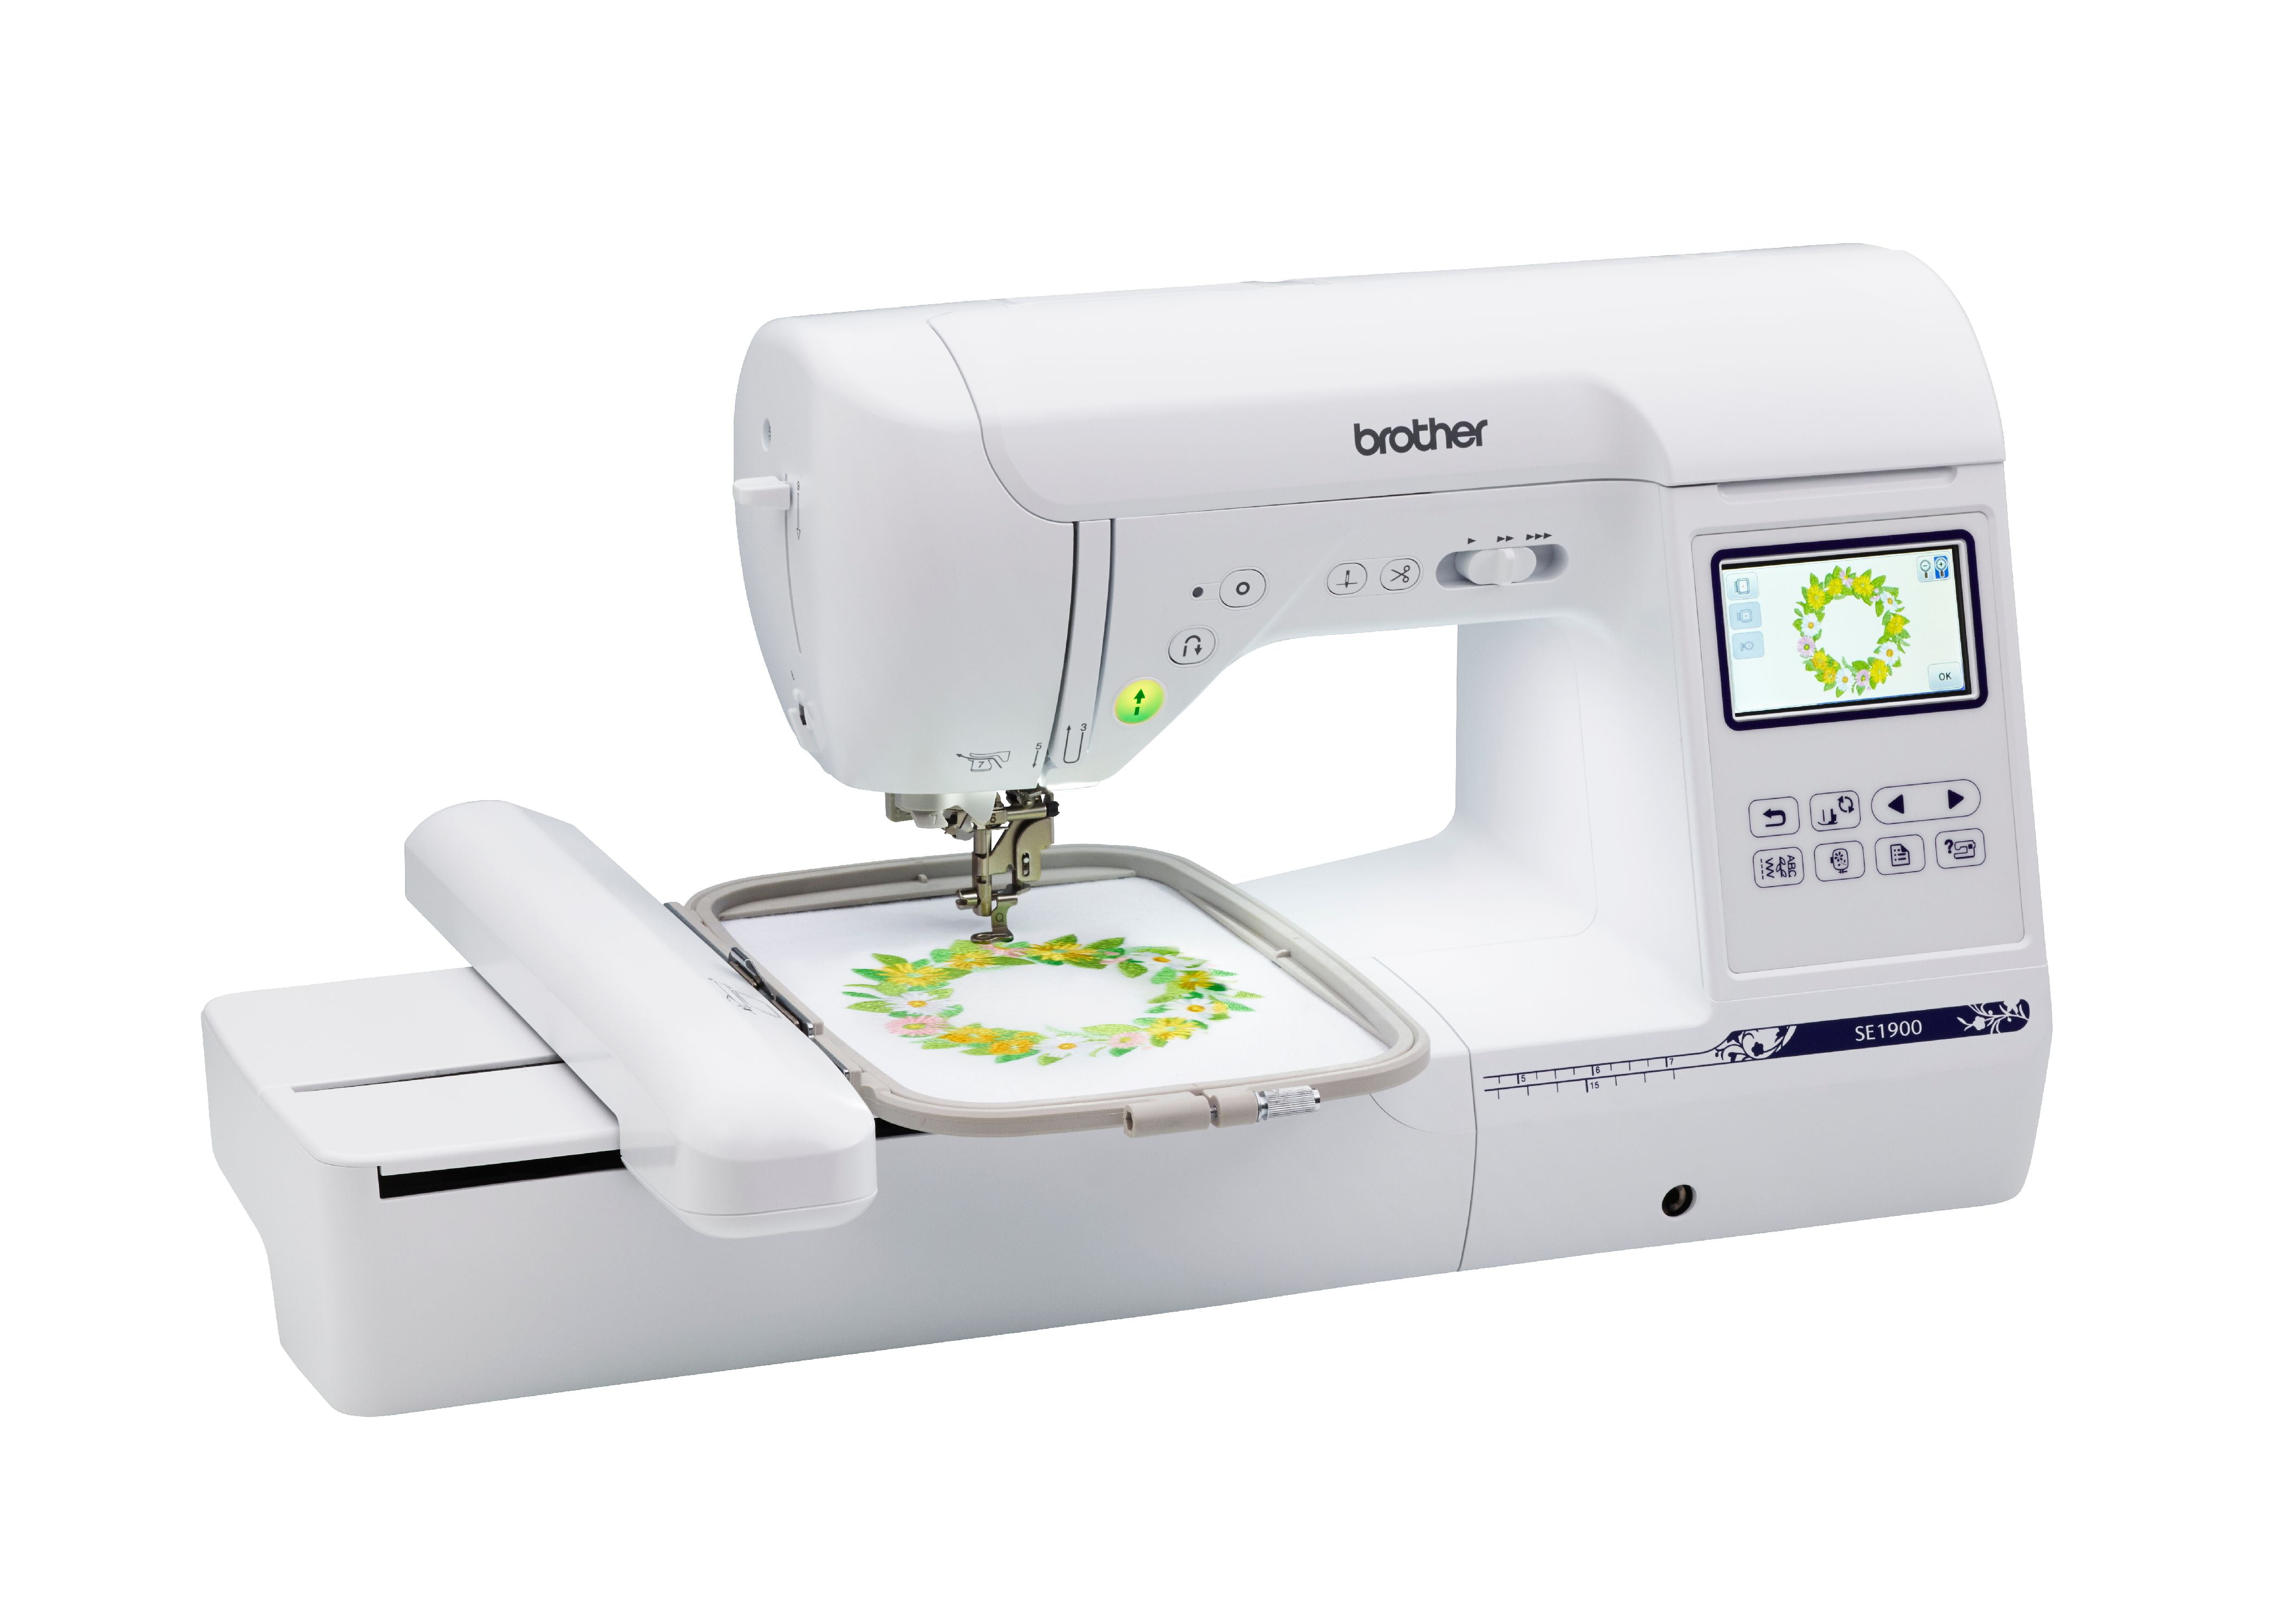 Buy Brother SE1900 Computerized Sewing and Embroidery Machine with240 Built-in Designs Online in Nigeria. 277960737